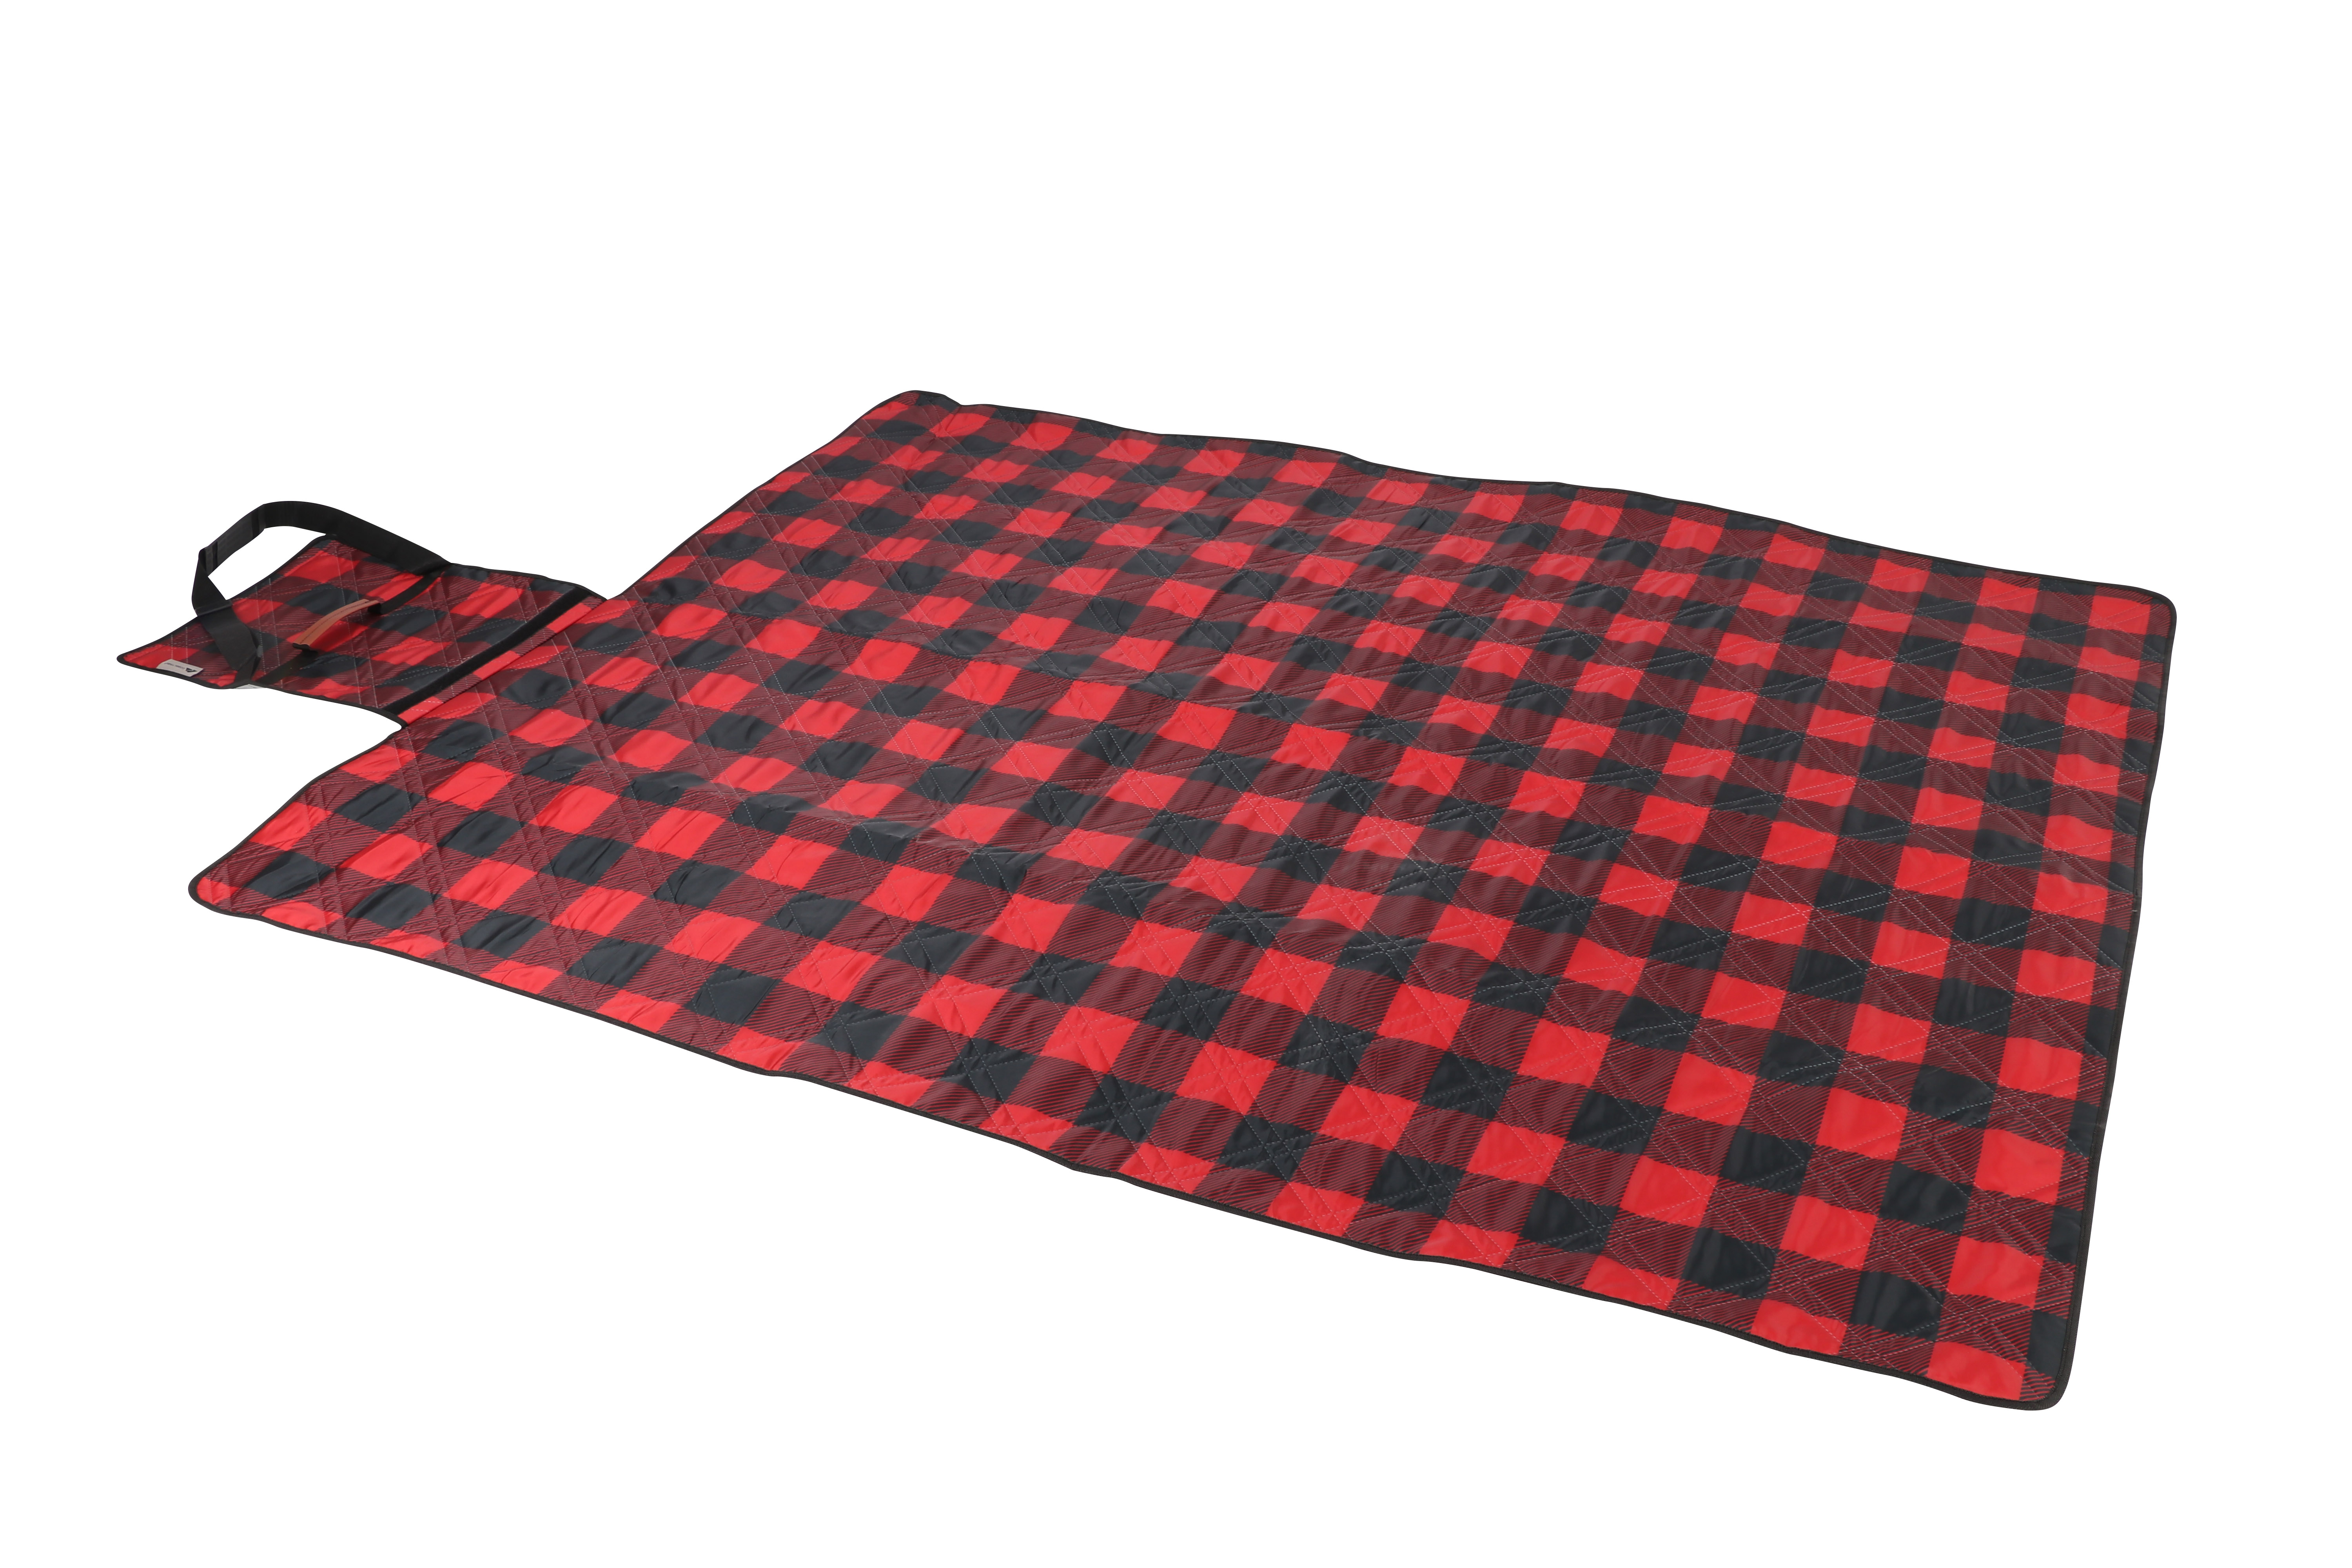 Ozark Trail 3 Piece Buffalo Plaid Camping Chairs and Blanket Combo, Red, Adult - image 3 of 6